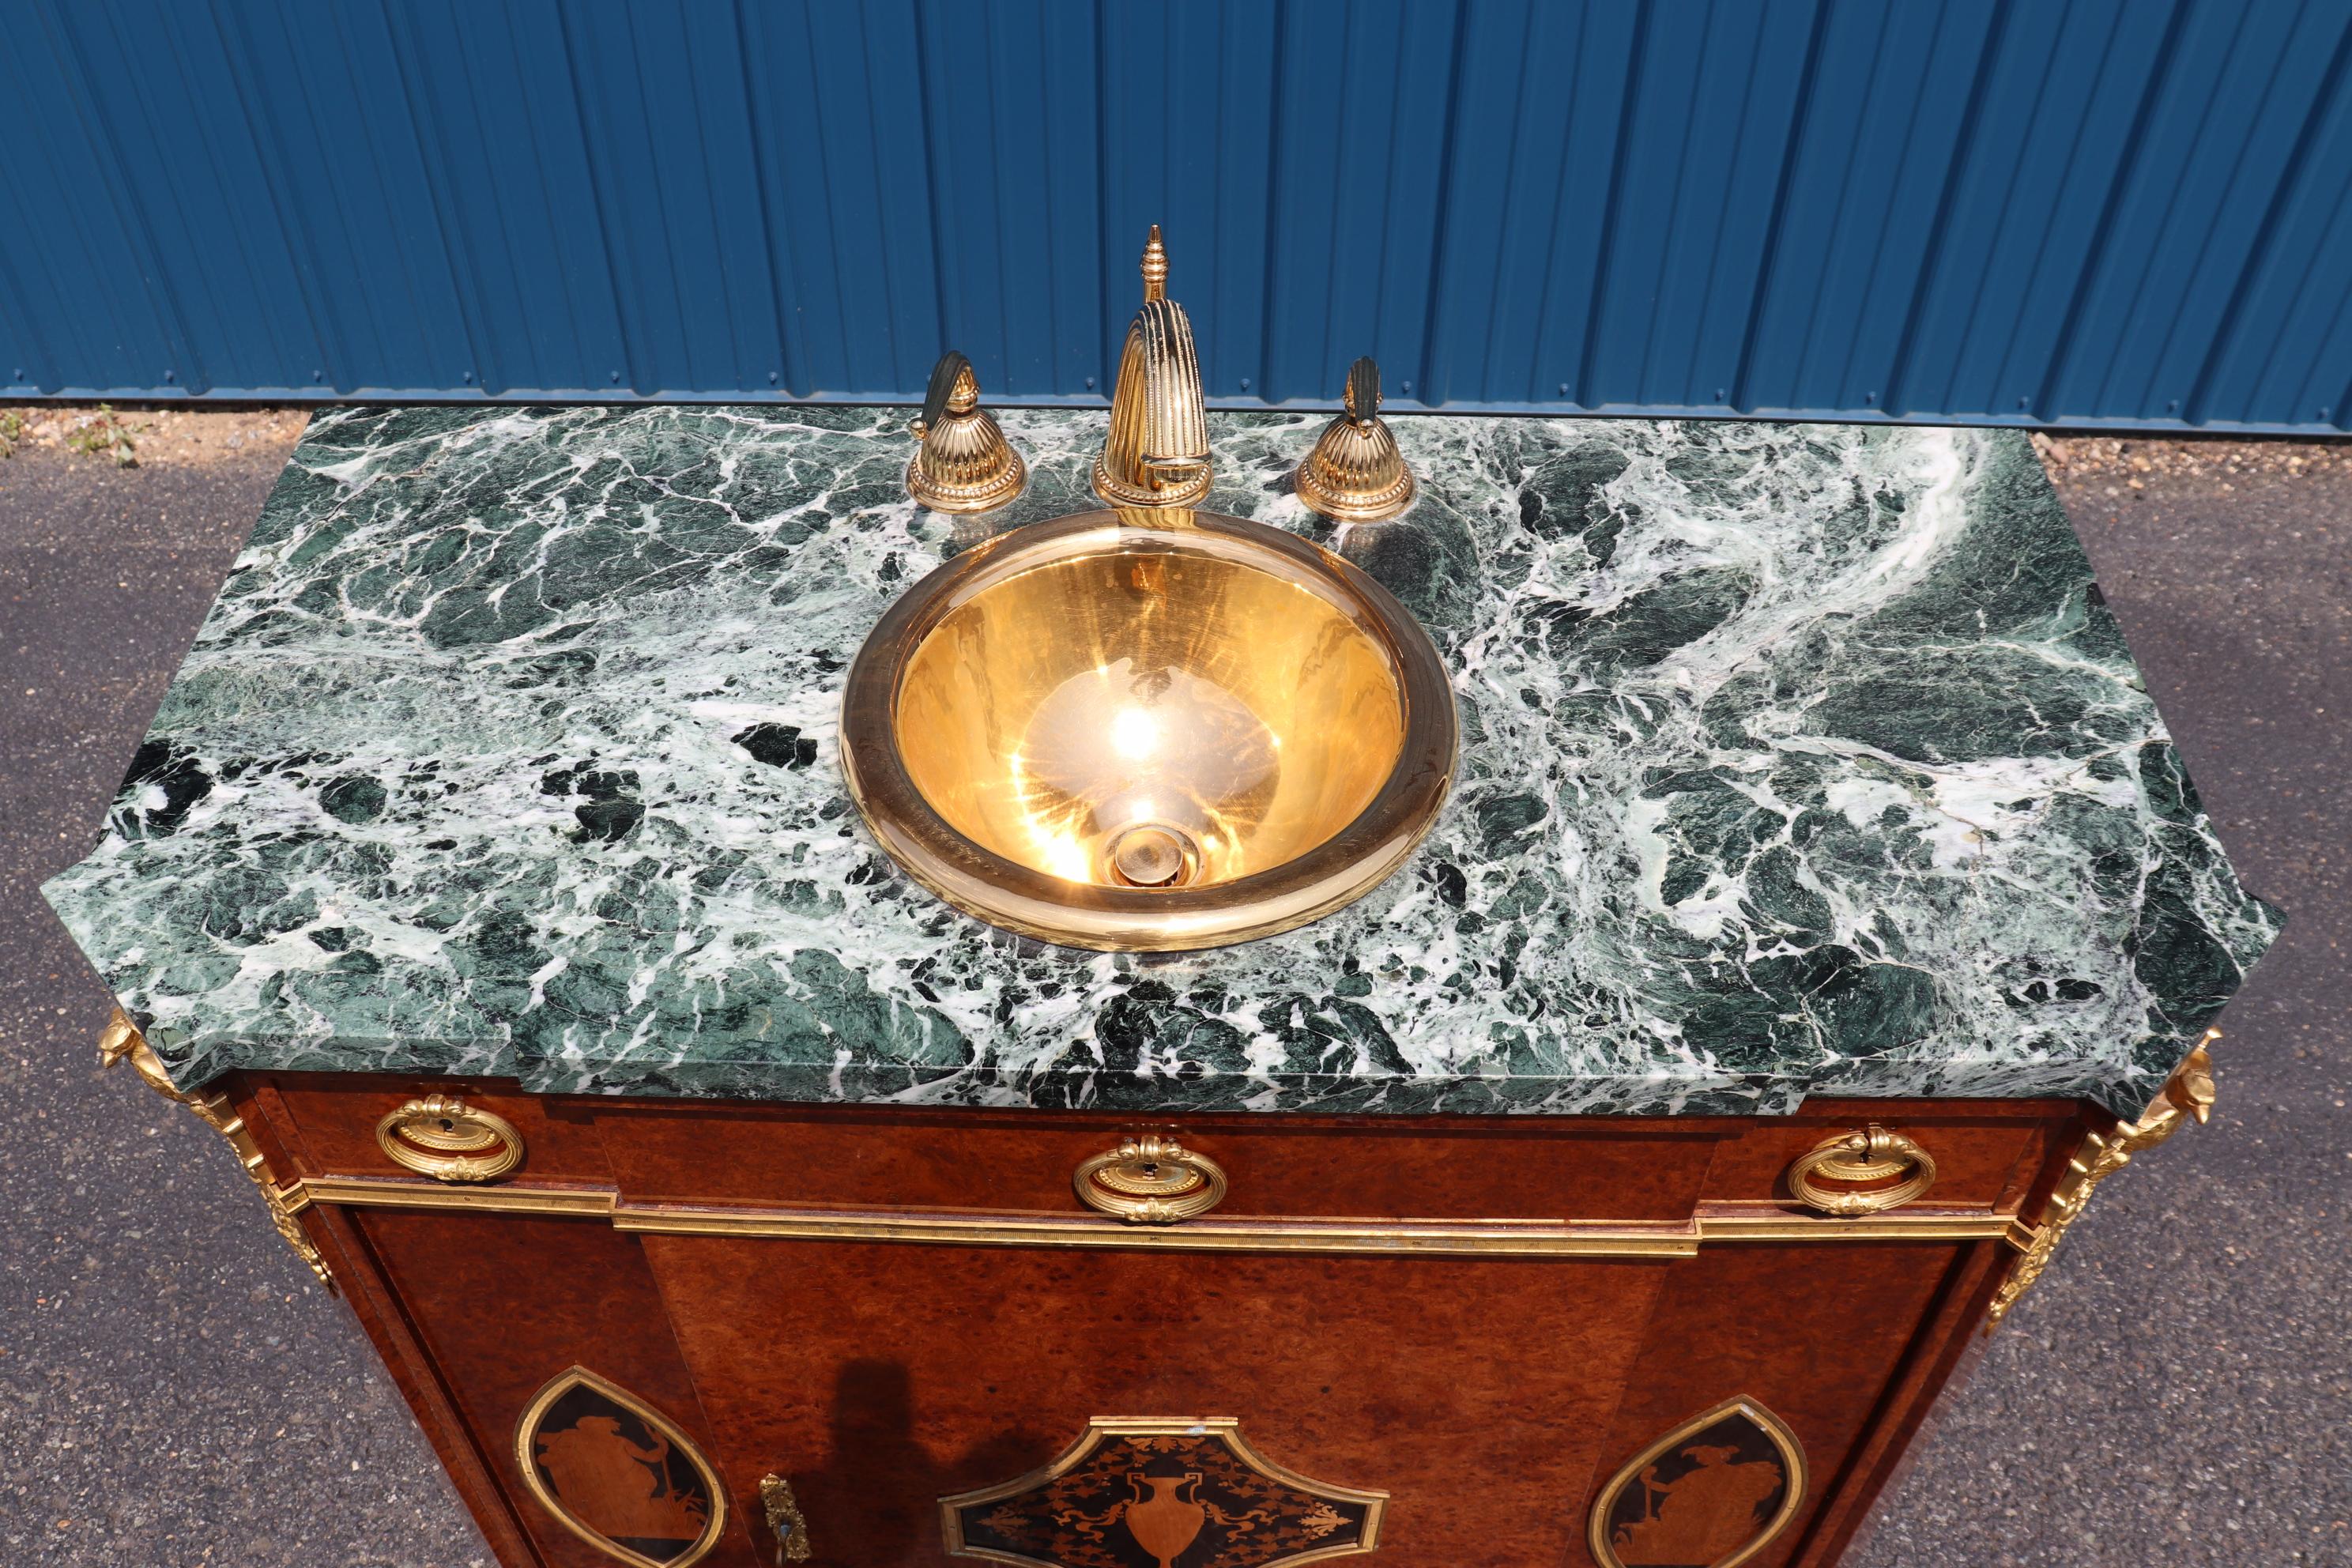 This is a special vanity with sink already installed. The owners evidently didn't understand what they had, and took a museum piece and made a sink out of it. The piece is made of gorgeous burled walnut and features incredible dor'e bronze mount